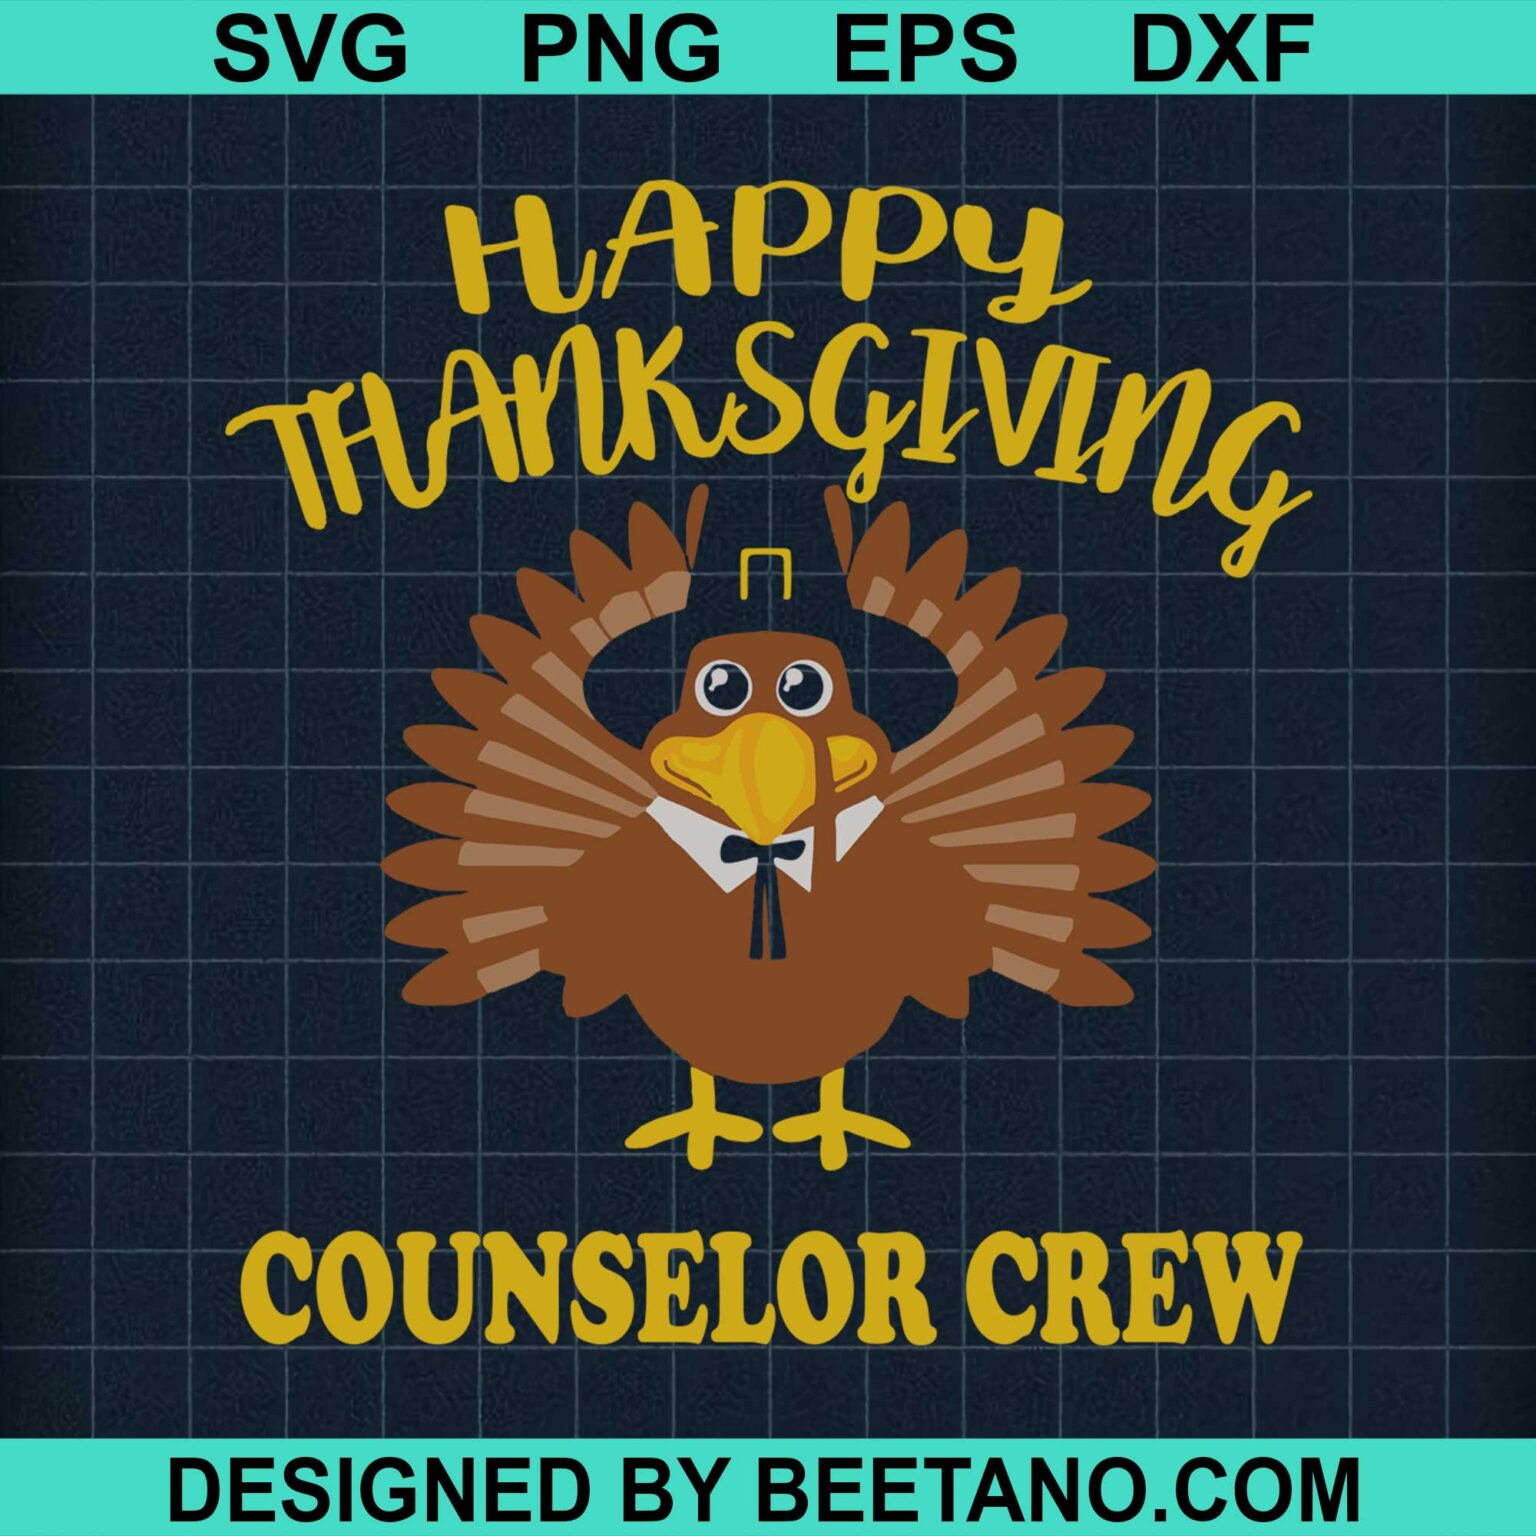 Counselor Crew Thanksgiving Day SVG, Happy thanksgiving SVG